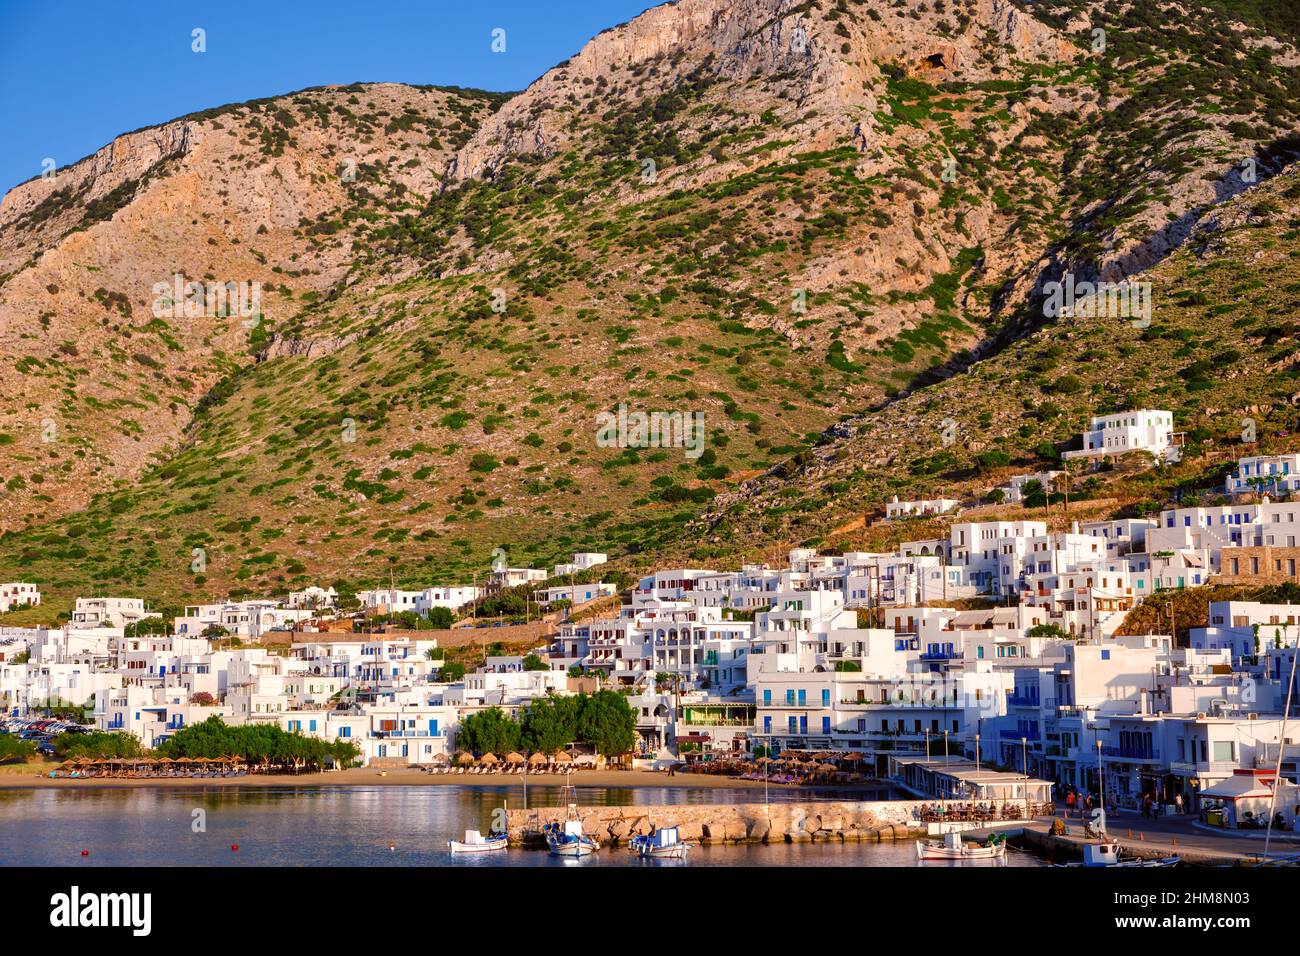 Beautiful view of Mediterranean island at sunset. Whitewashed houses, hills, clear sky, blue sea waters, beaches. Small Greek village of Milos, Greece Stock Photo